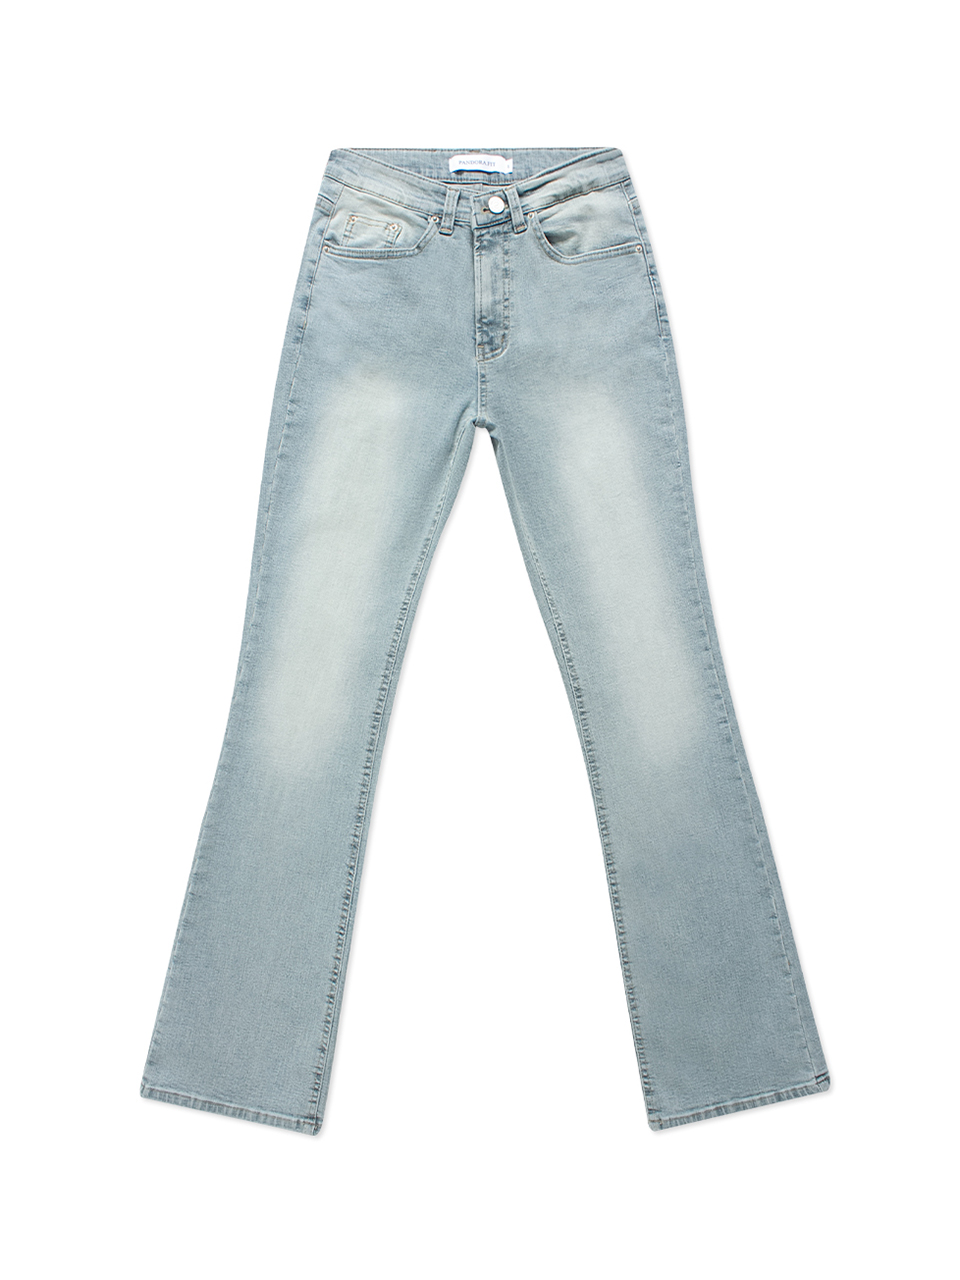 [BOOTSCUT] Rocal Jeans